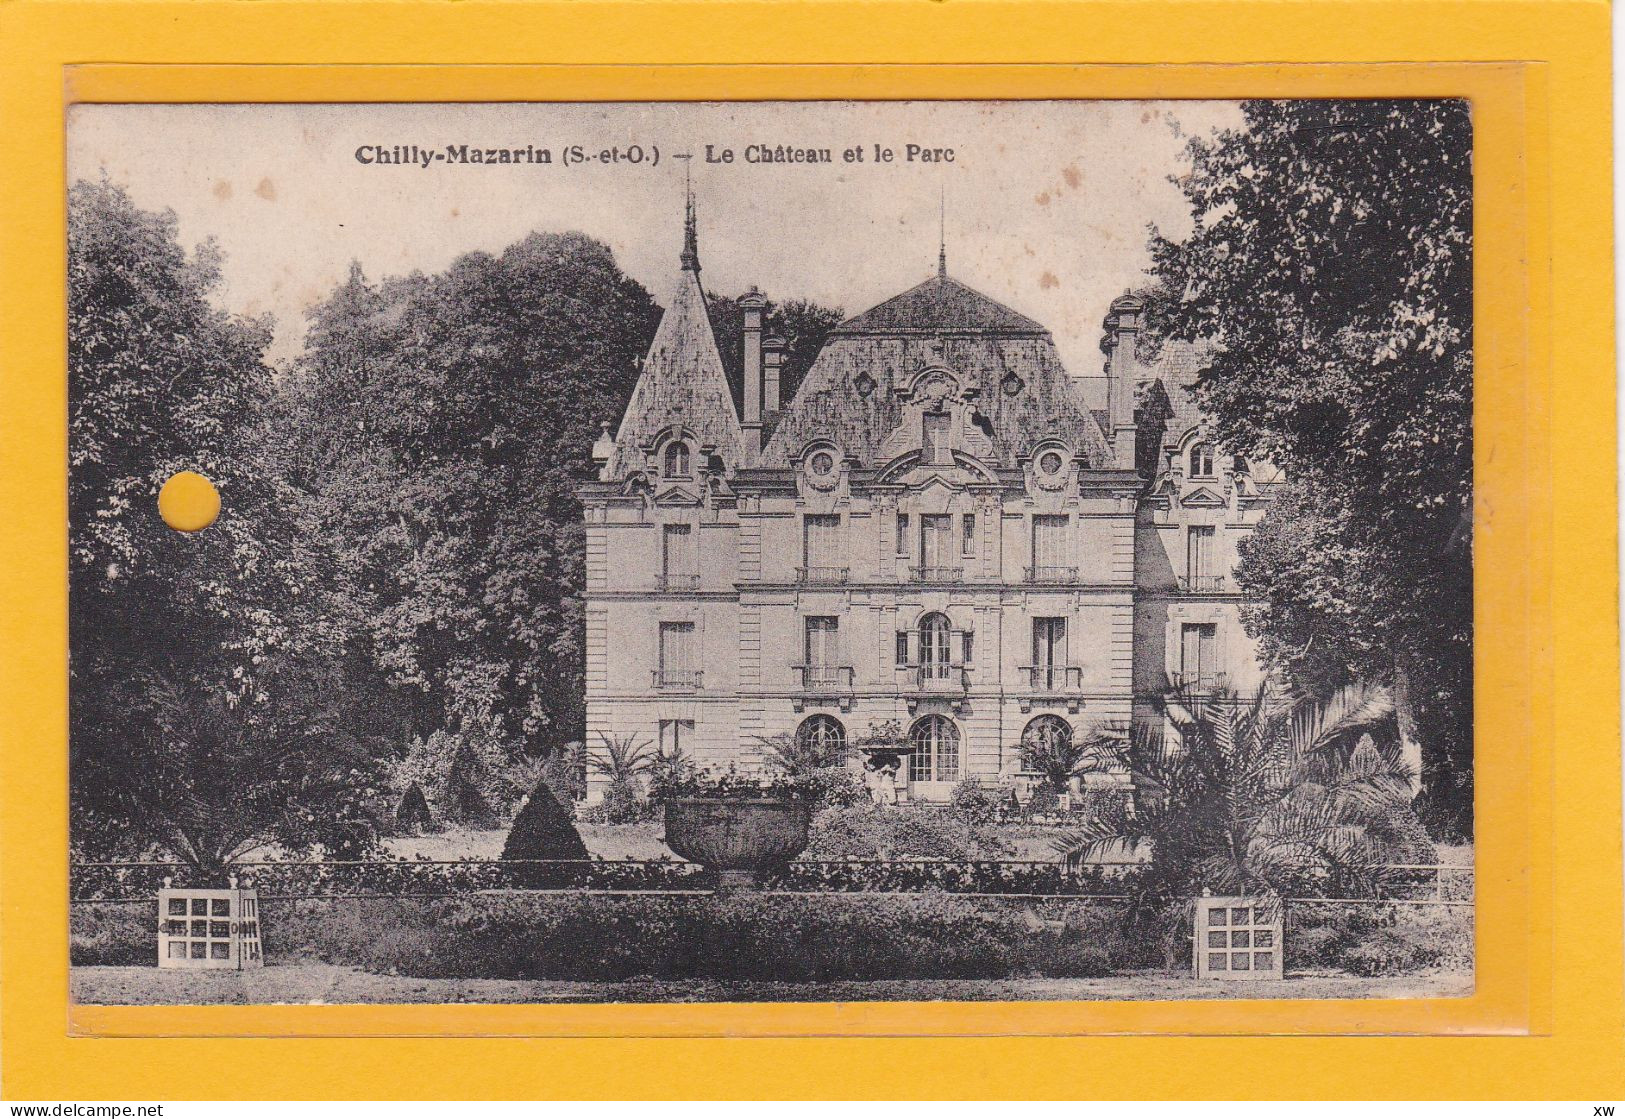 CHILLY-MAZARIN - 91 - Le Chateau Et Le Parc - A 2560 - Chilly Mazarin